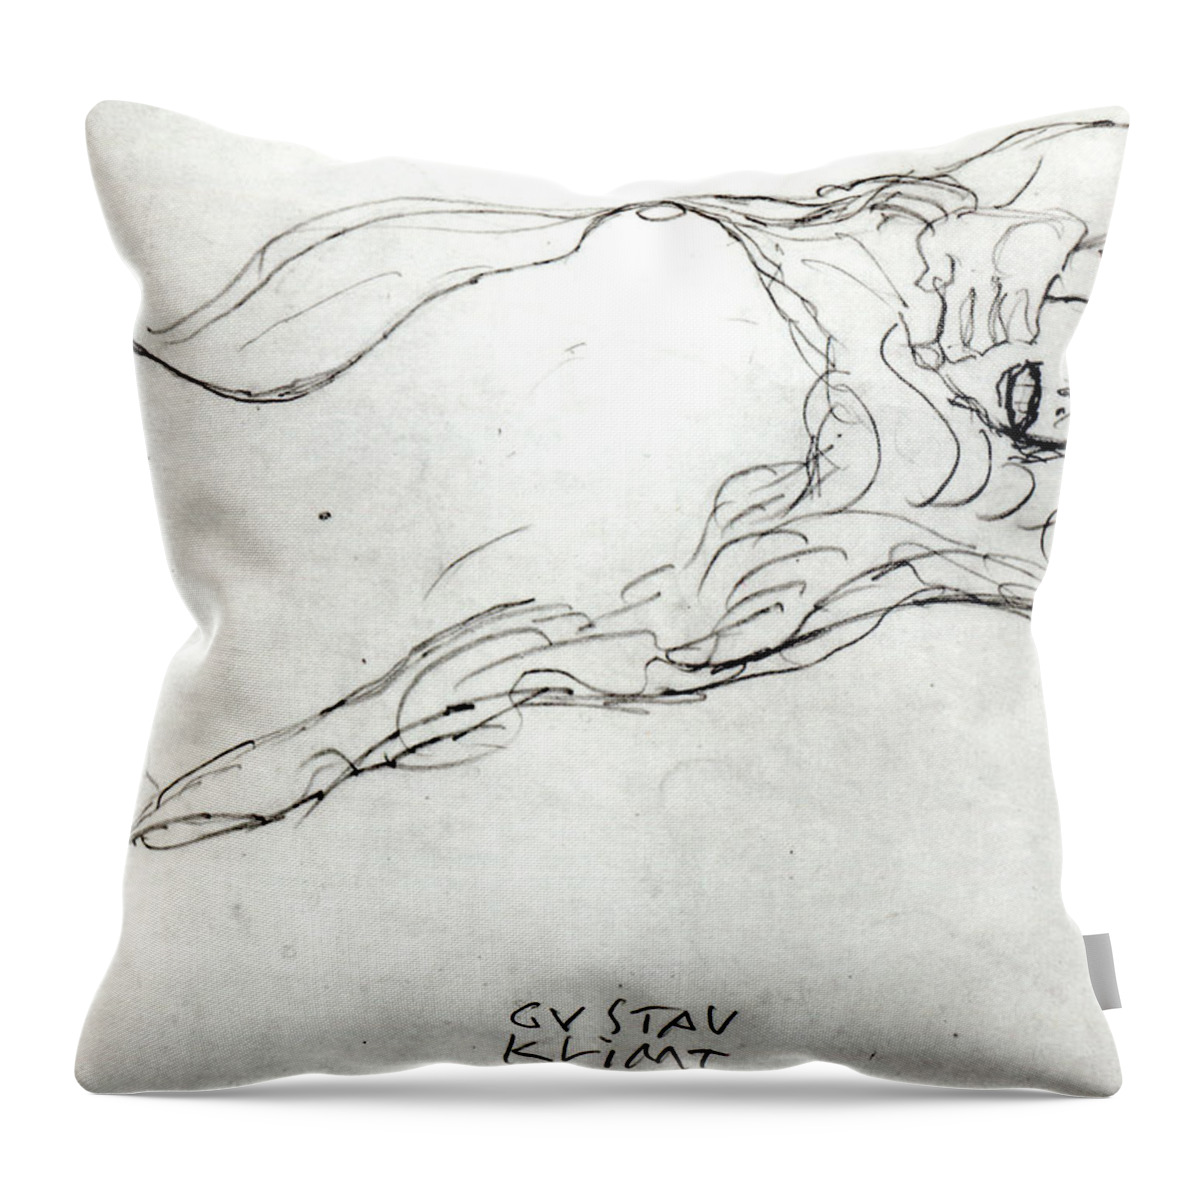 Klimt Throw Pillow featuring the drawing Reclining Woman by Gustav Klimt